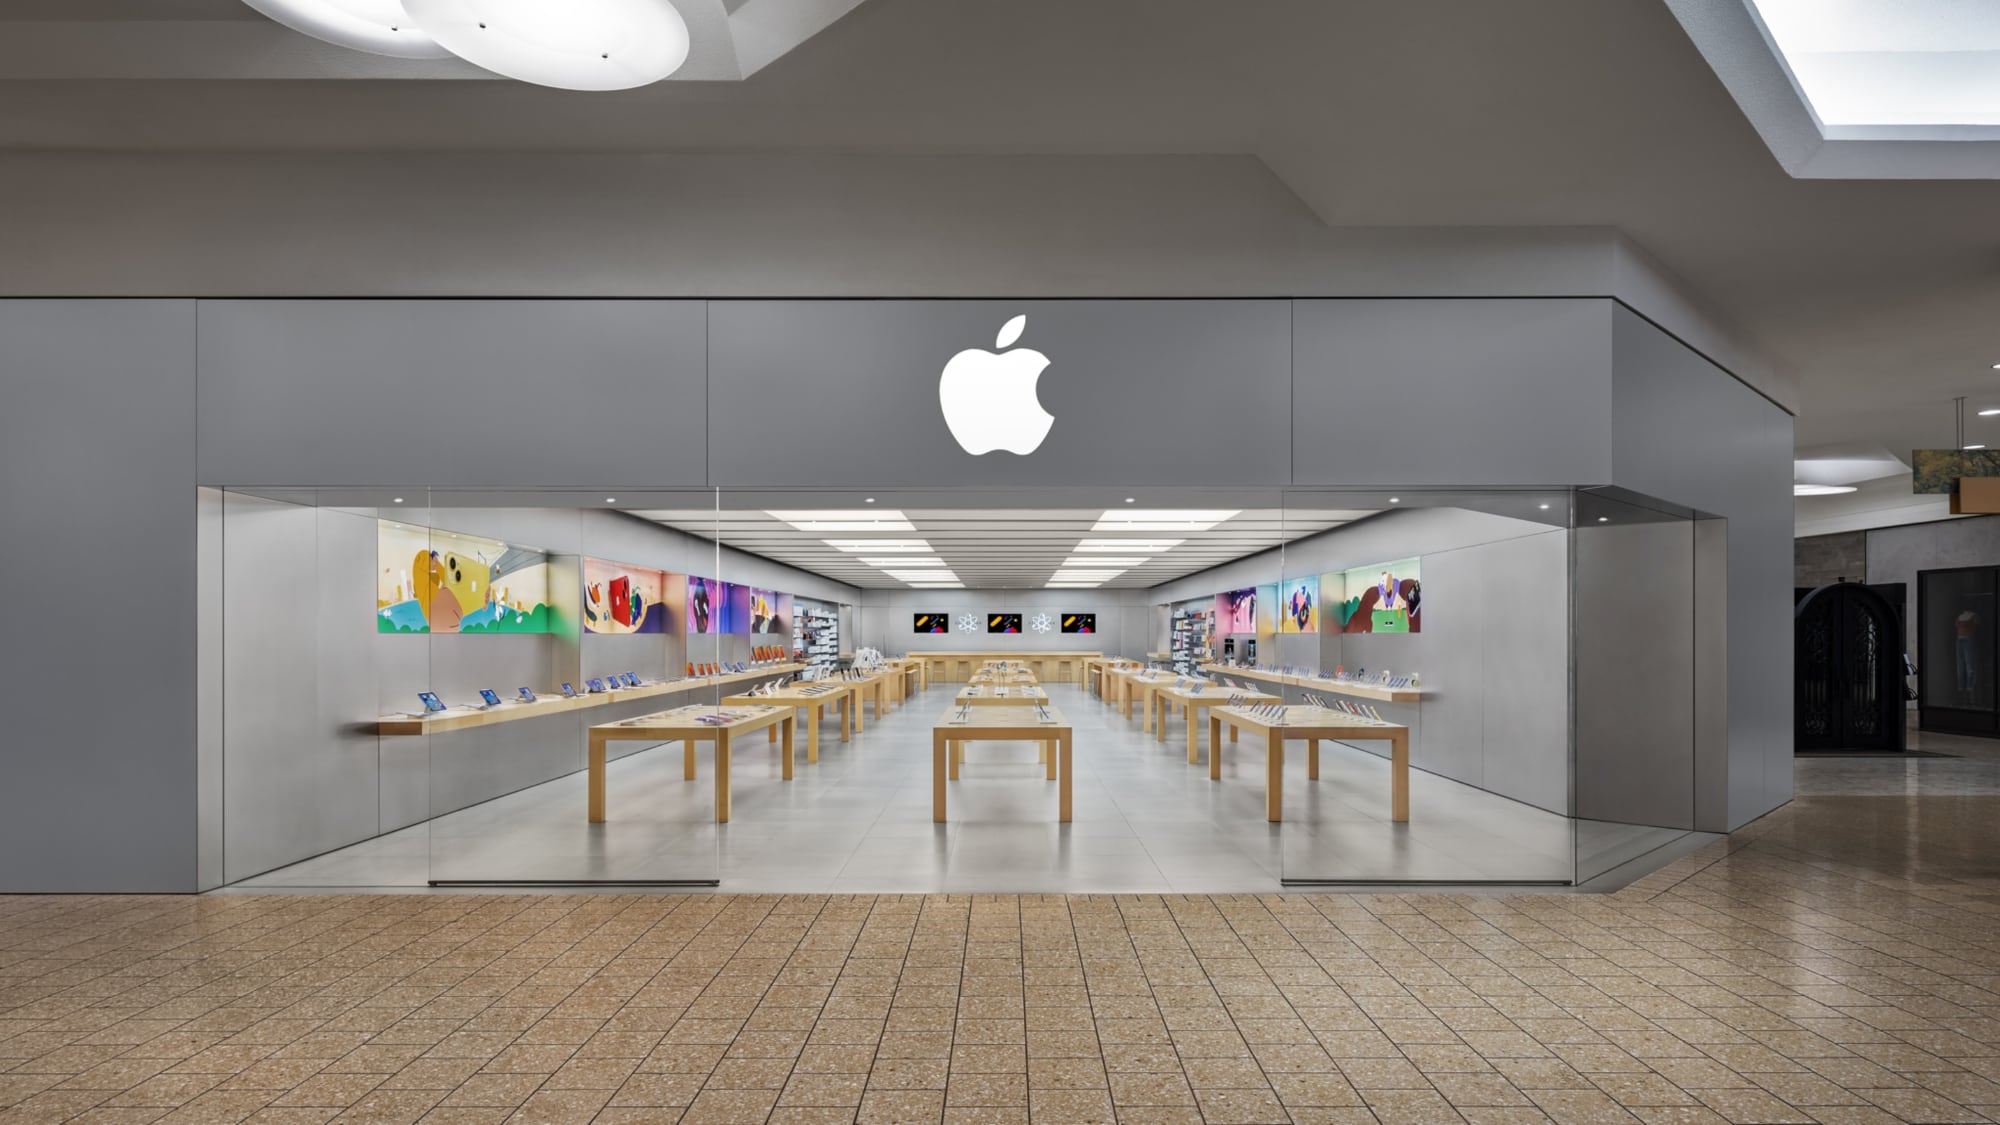 Apple Store Employees in New Jersey File to Unionize